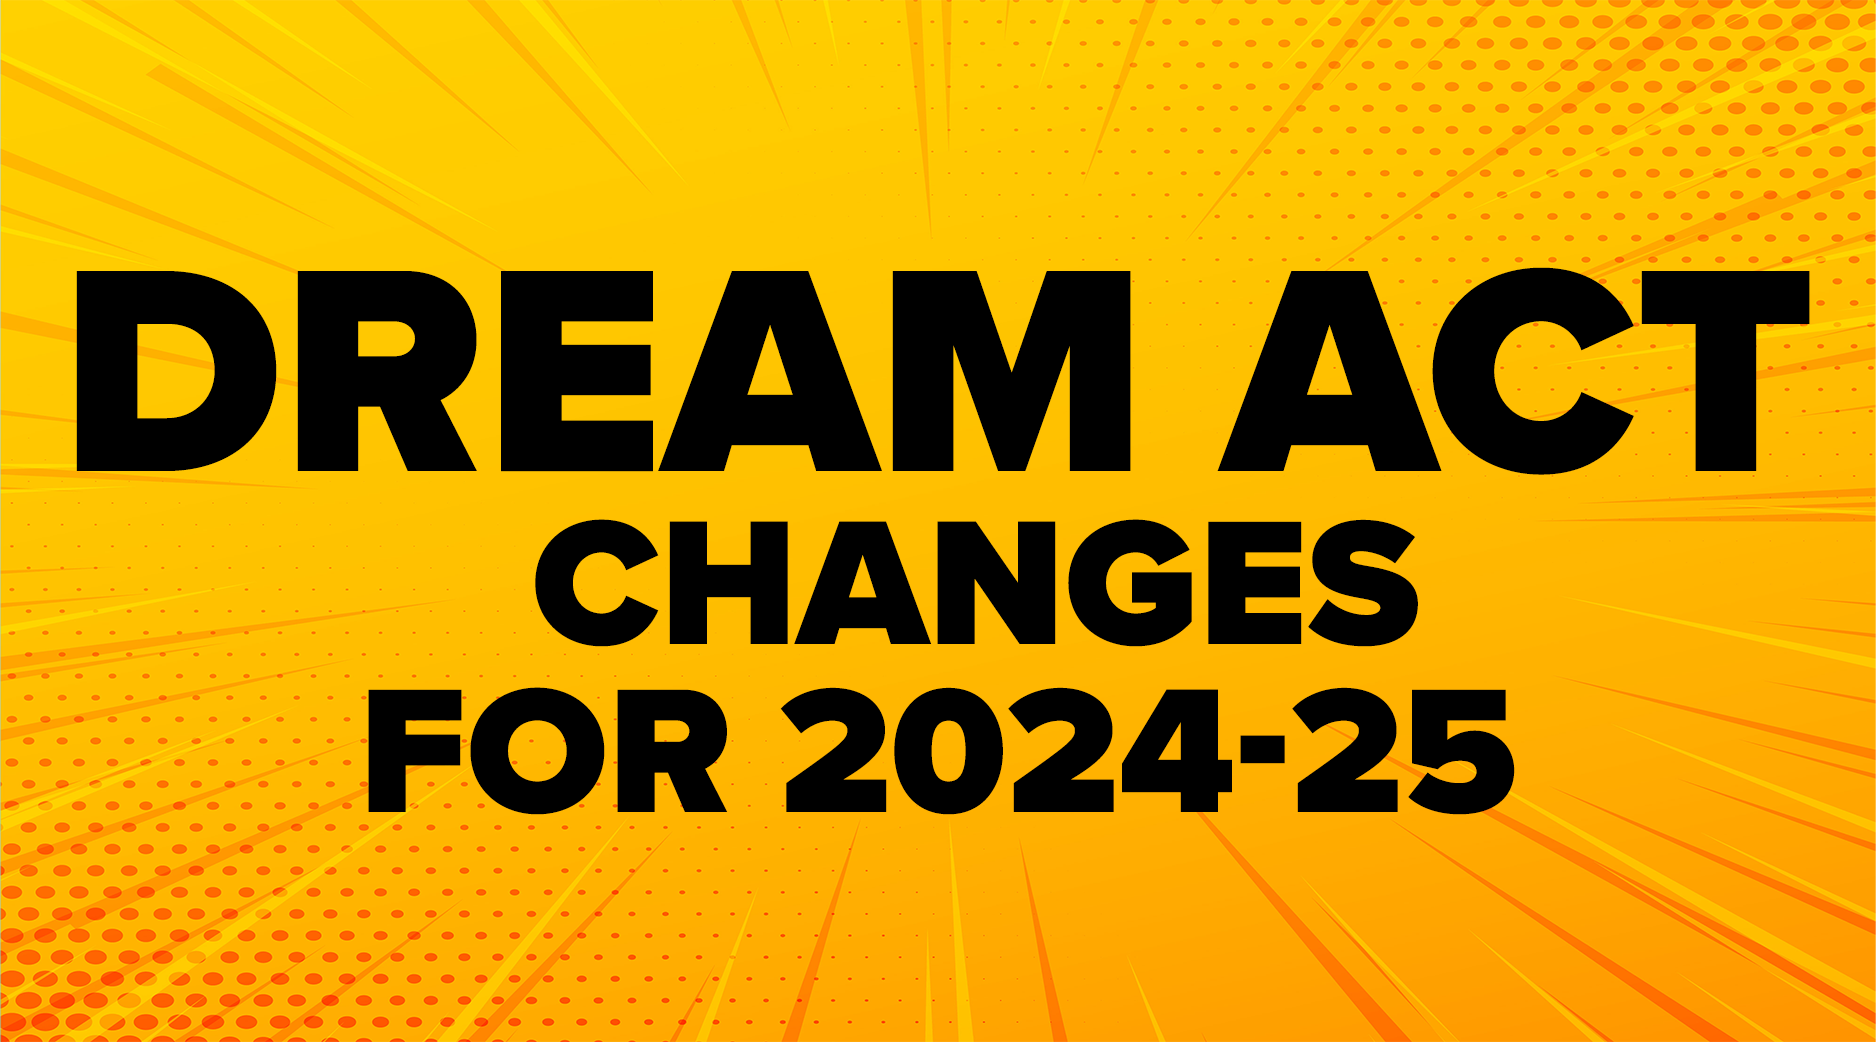 DREAM ACT - Changes coming for 2024-25